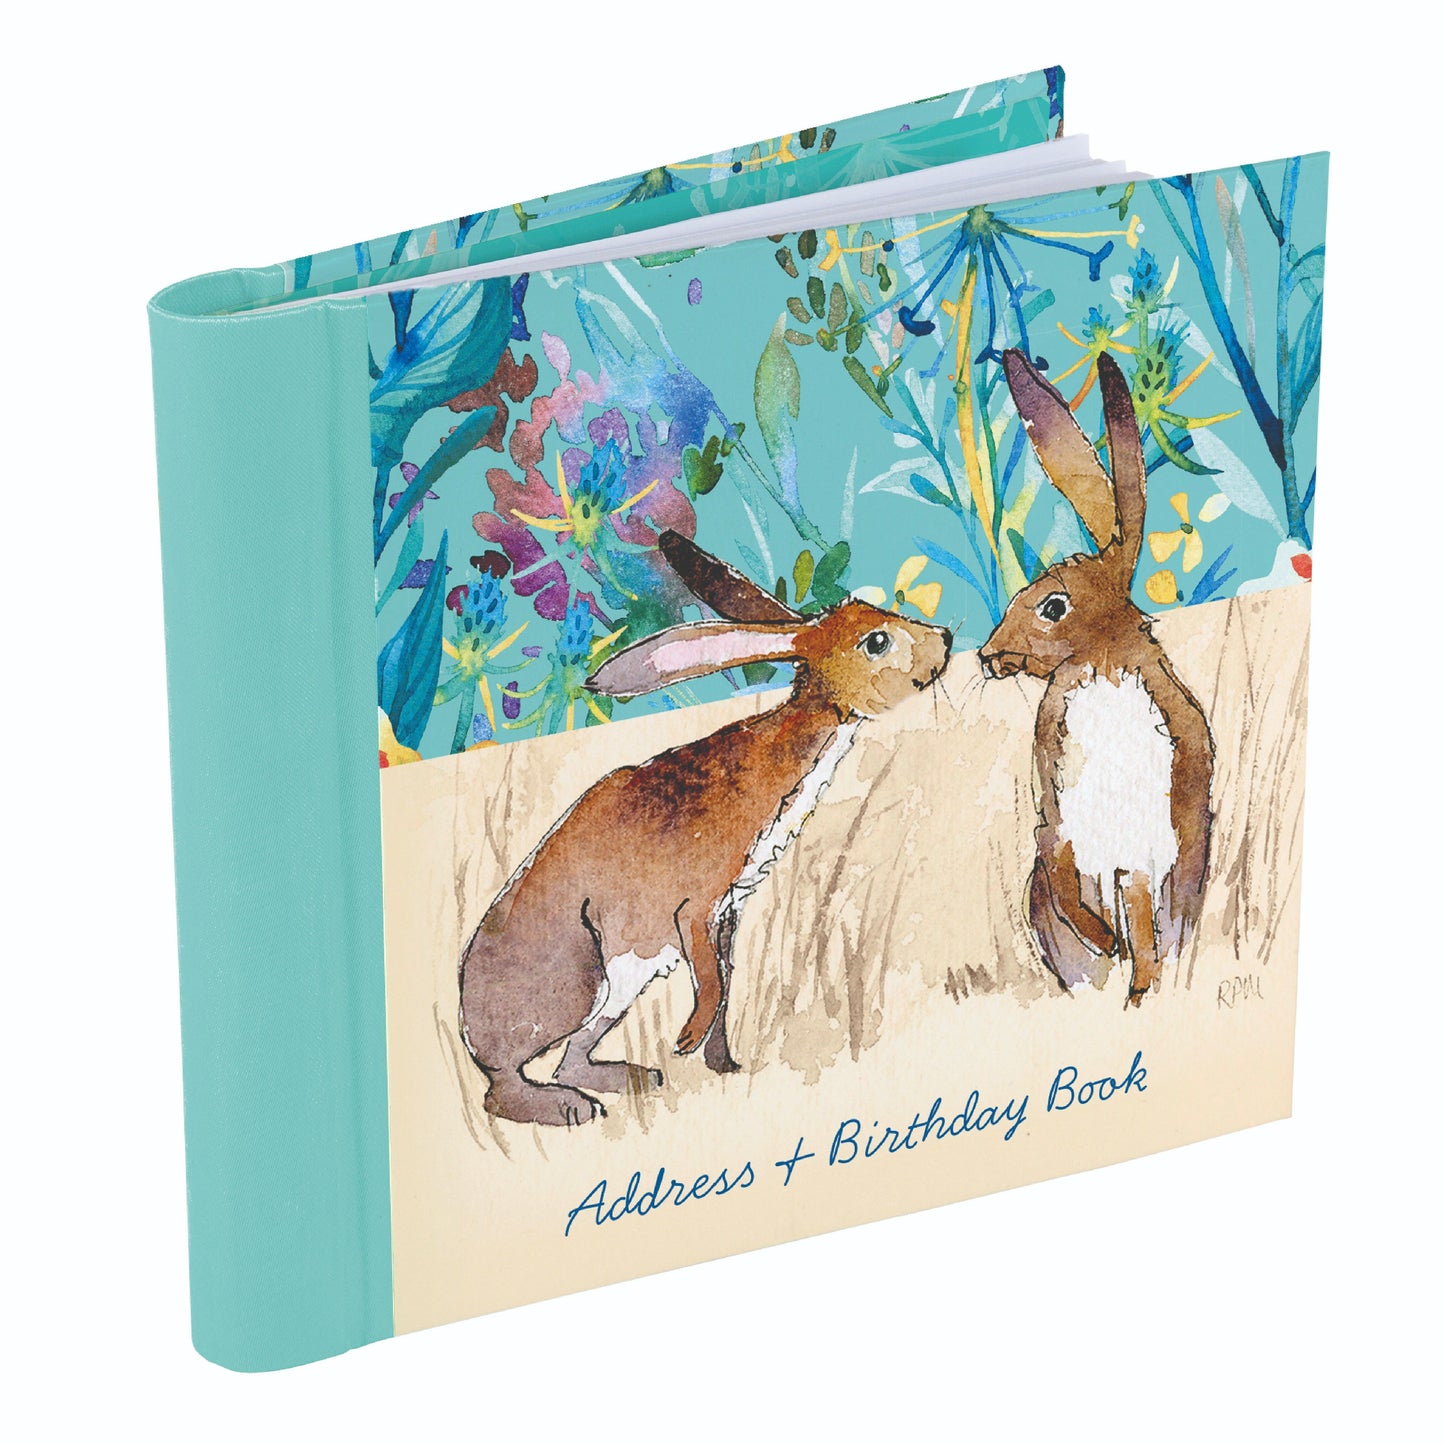 Gifted Stationery Kissing Hares Address & Birthday Book